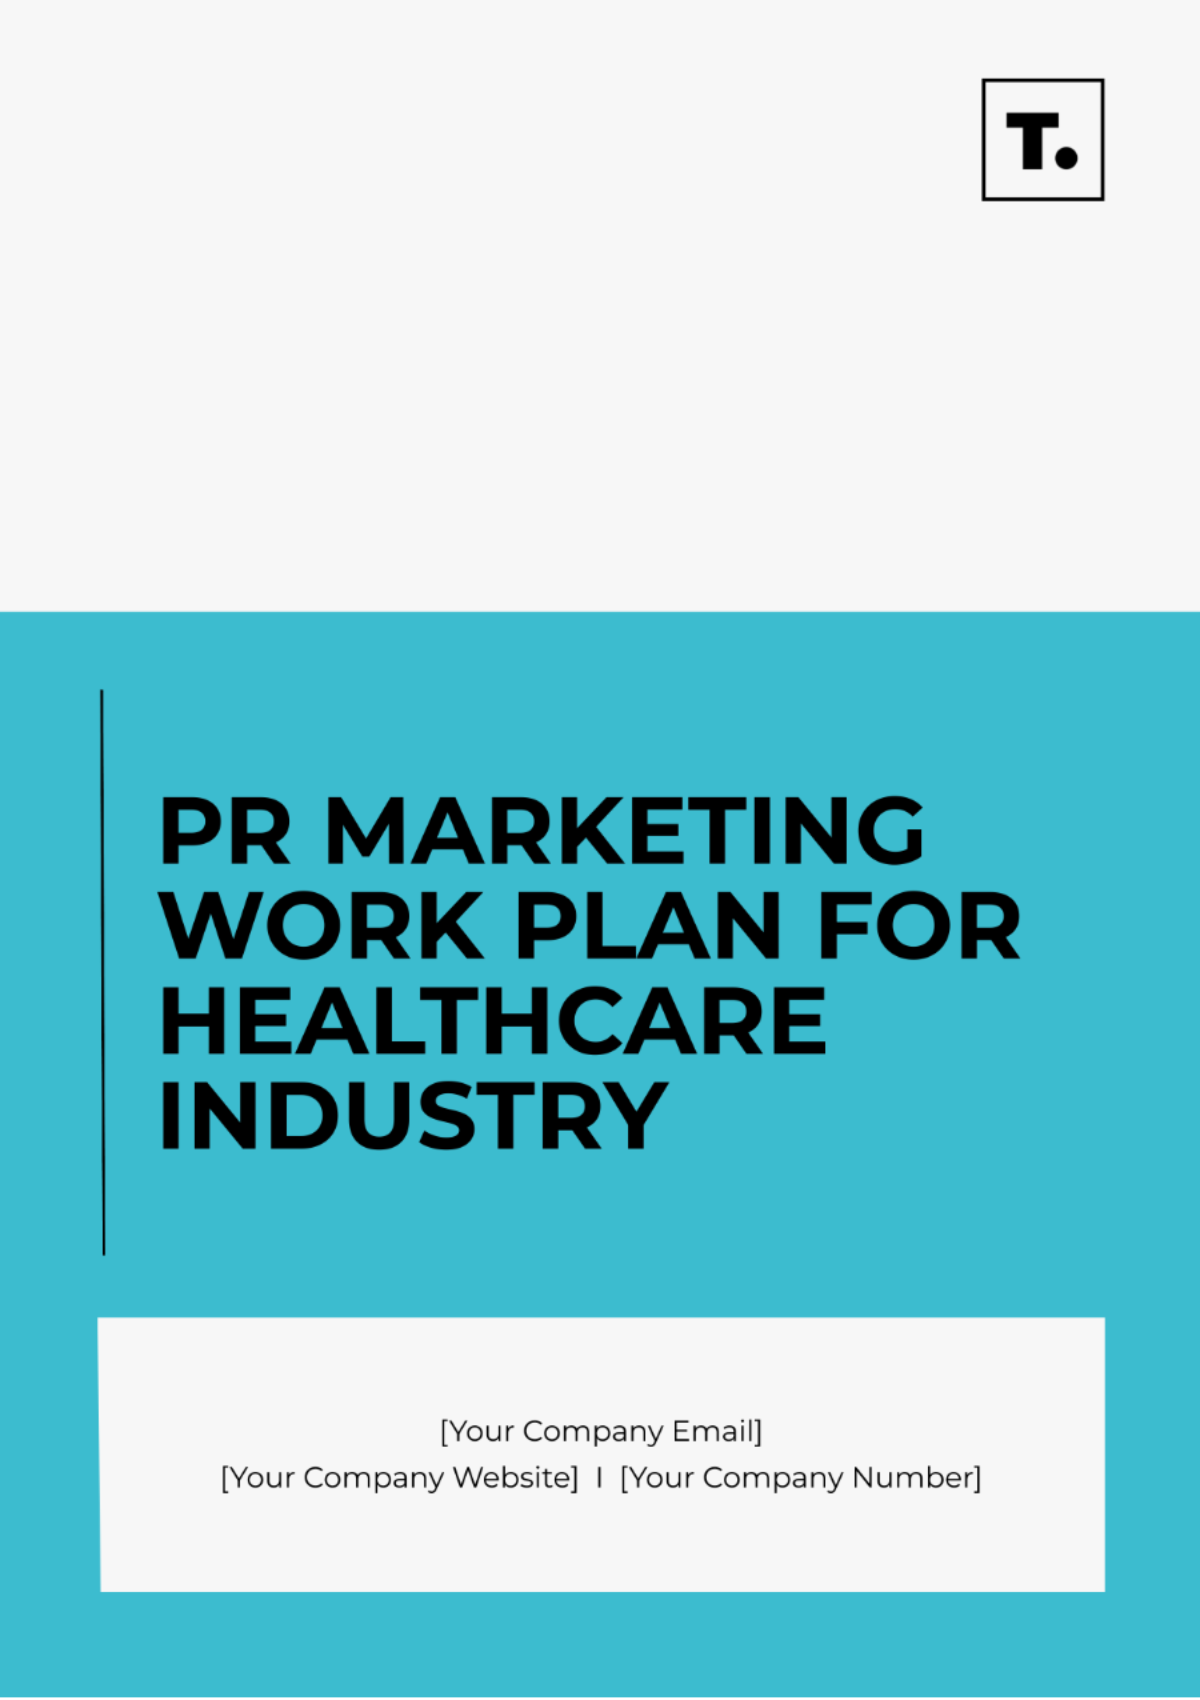 PR Marketing Work Plan For Healthcare Industry Template